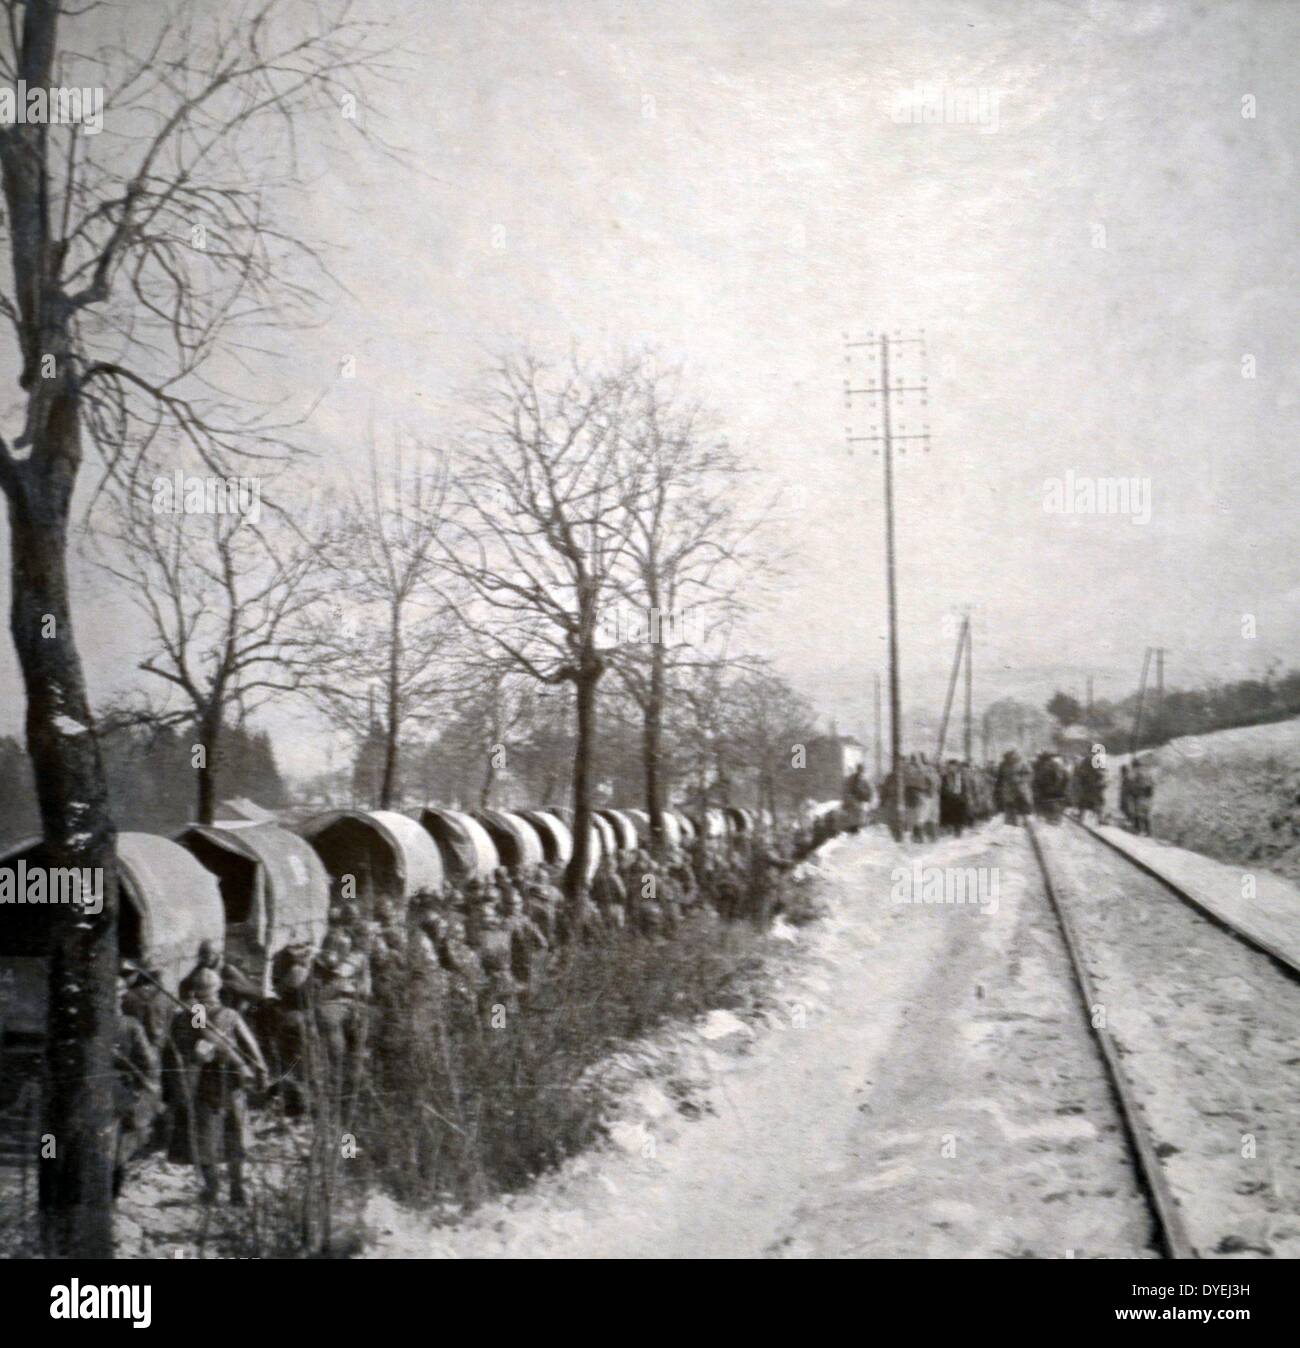 World War I - The Battle of Verdun was fought from 21 February – 18 December 1916 . Around Verdun, during the battle. On the road auto trucks are being reinforced whileon the railway track, the walking wounded are moving towards the ambulance. Stock Photo